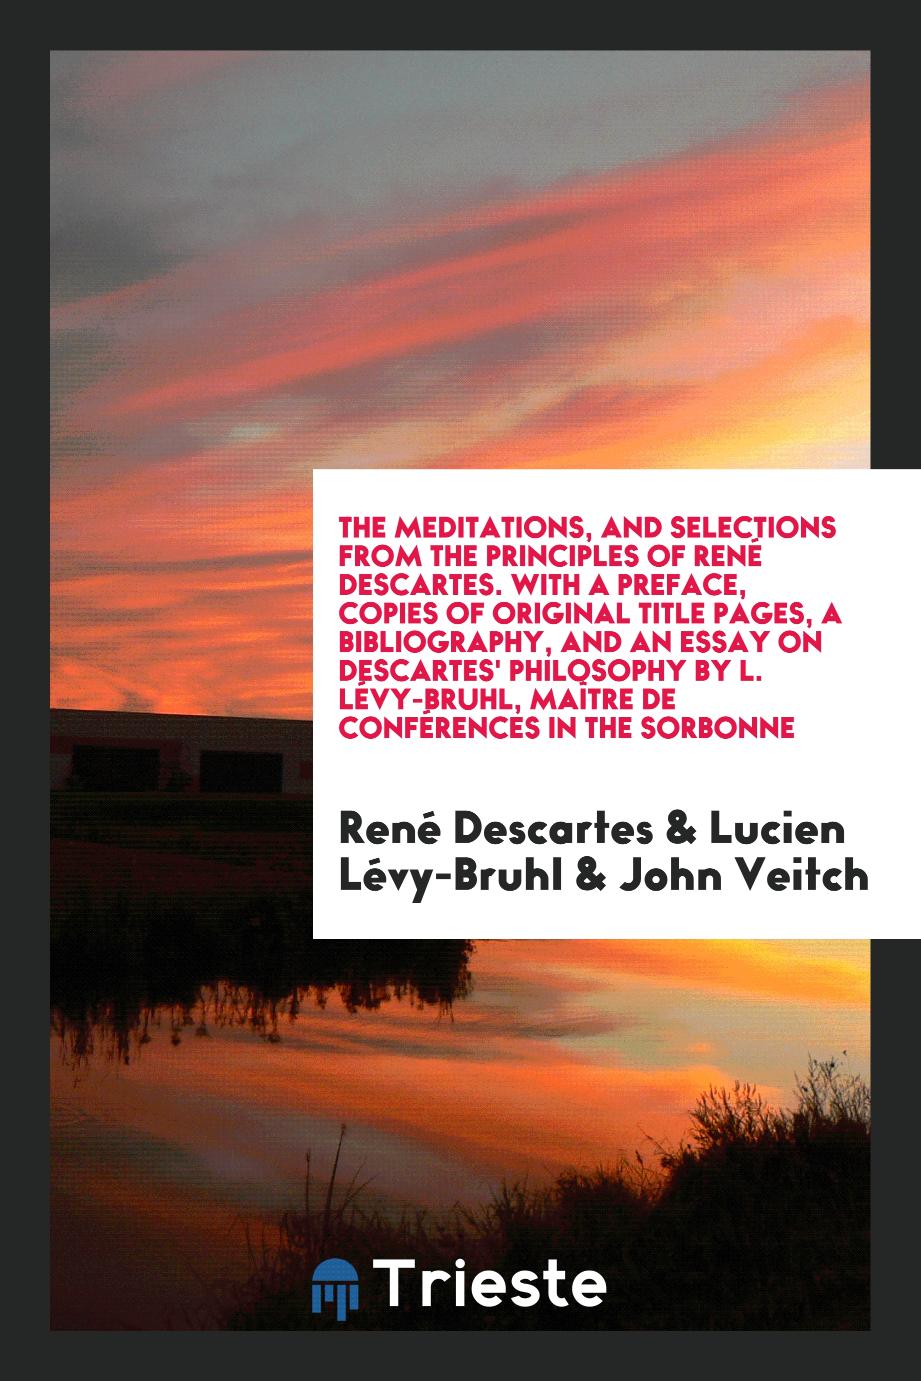 The Meditations, and Selections from the Principles of René Descartes. With a Preface, Copies of Original Title Pages, a Bibliography, and an Essay on Descartes' Philosophy by L. Lévy-Bruhl, Maître de Conférences in the Sorbonne